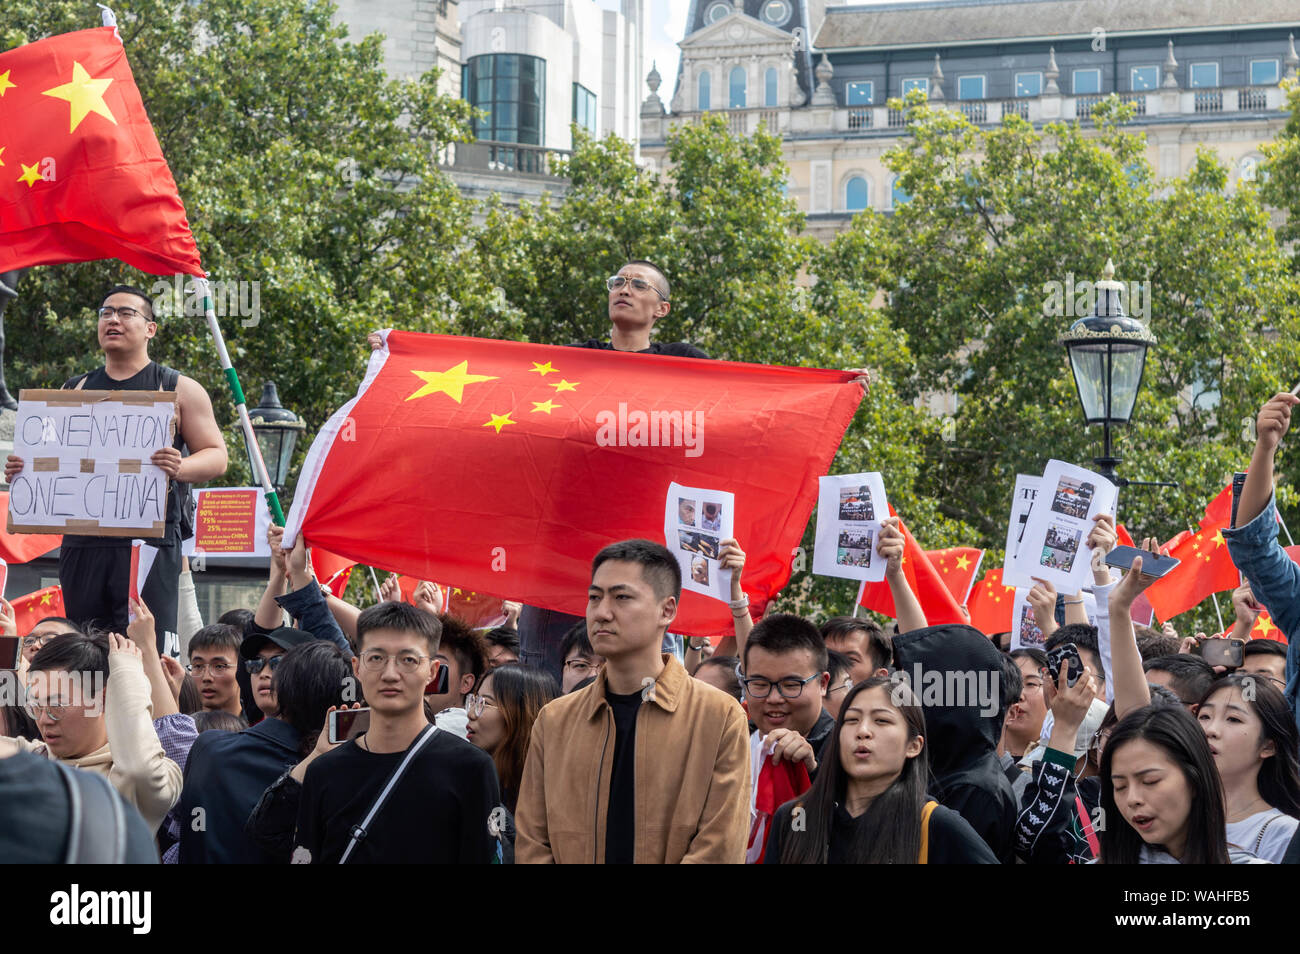 London, United Kingdom - August 17,  2019: Chinese citizens against the UK Solidarity with Hong Kong Rally. Stock Photo